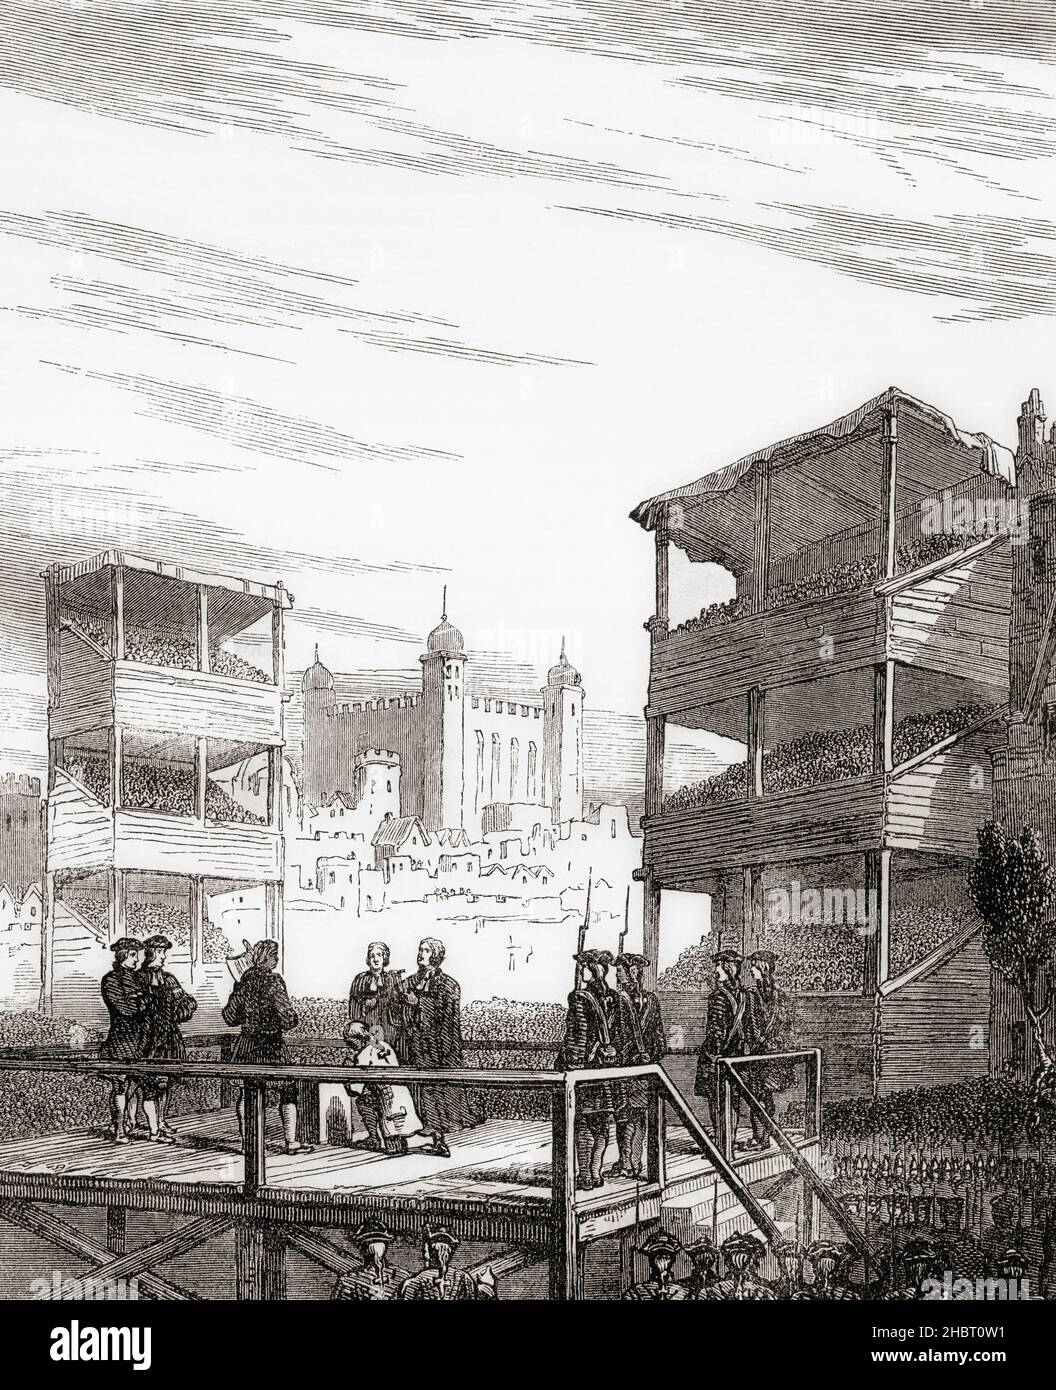 The execution of Lord Derwentwater on Tower Hill, London, England, 1716.  James Radclyffe, 3rd Earl of Derwentwater, 1689 – 1716.  English Jacobite, executed for treason.  From Cassell's Illustrated History of England, published c.1890. Stock Photo